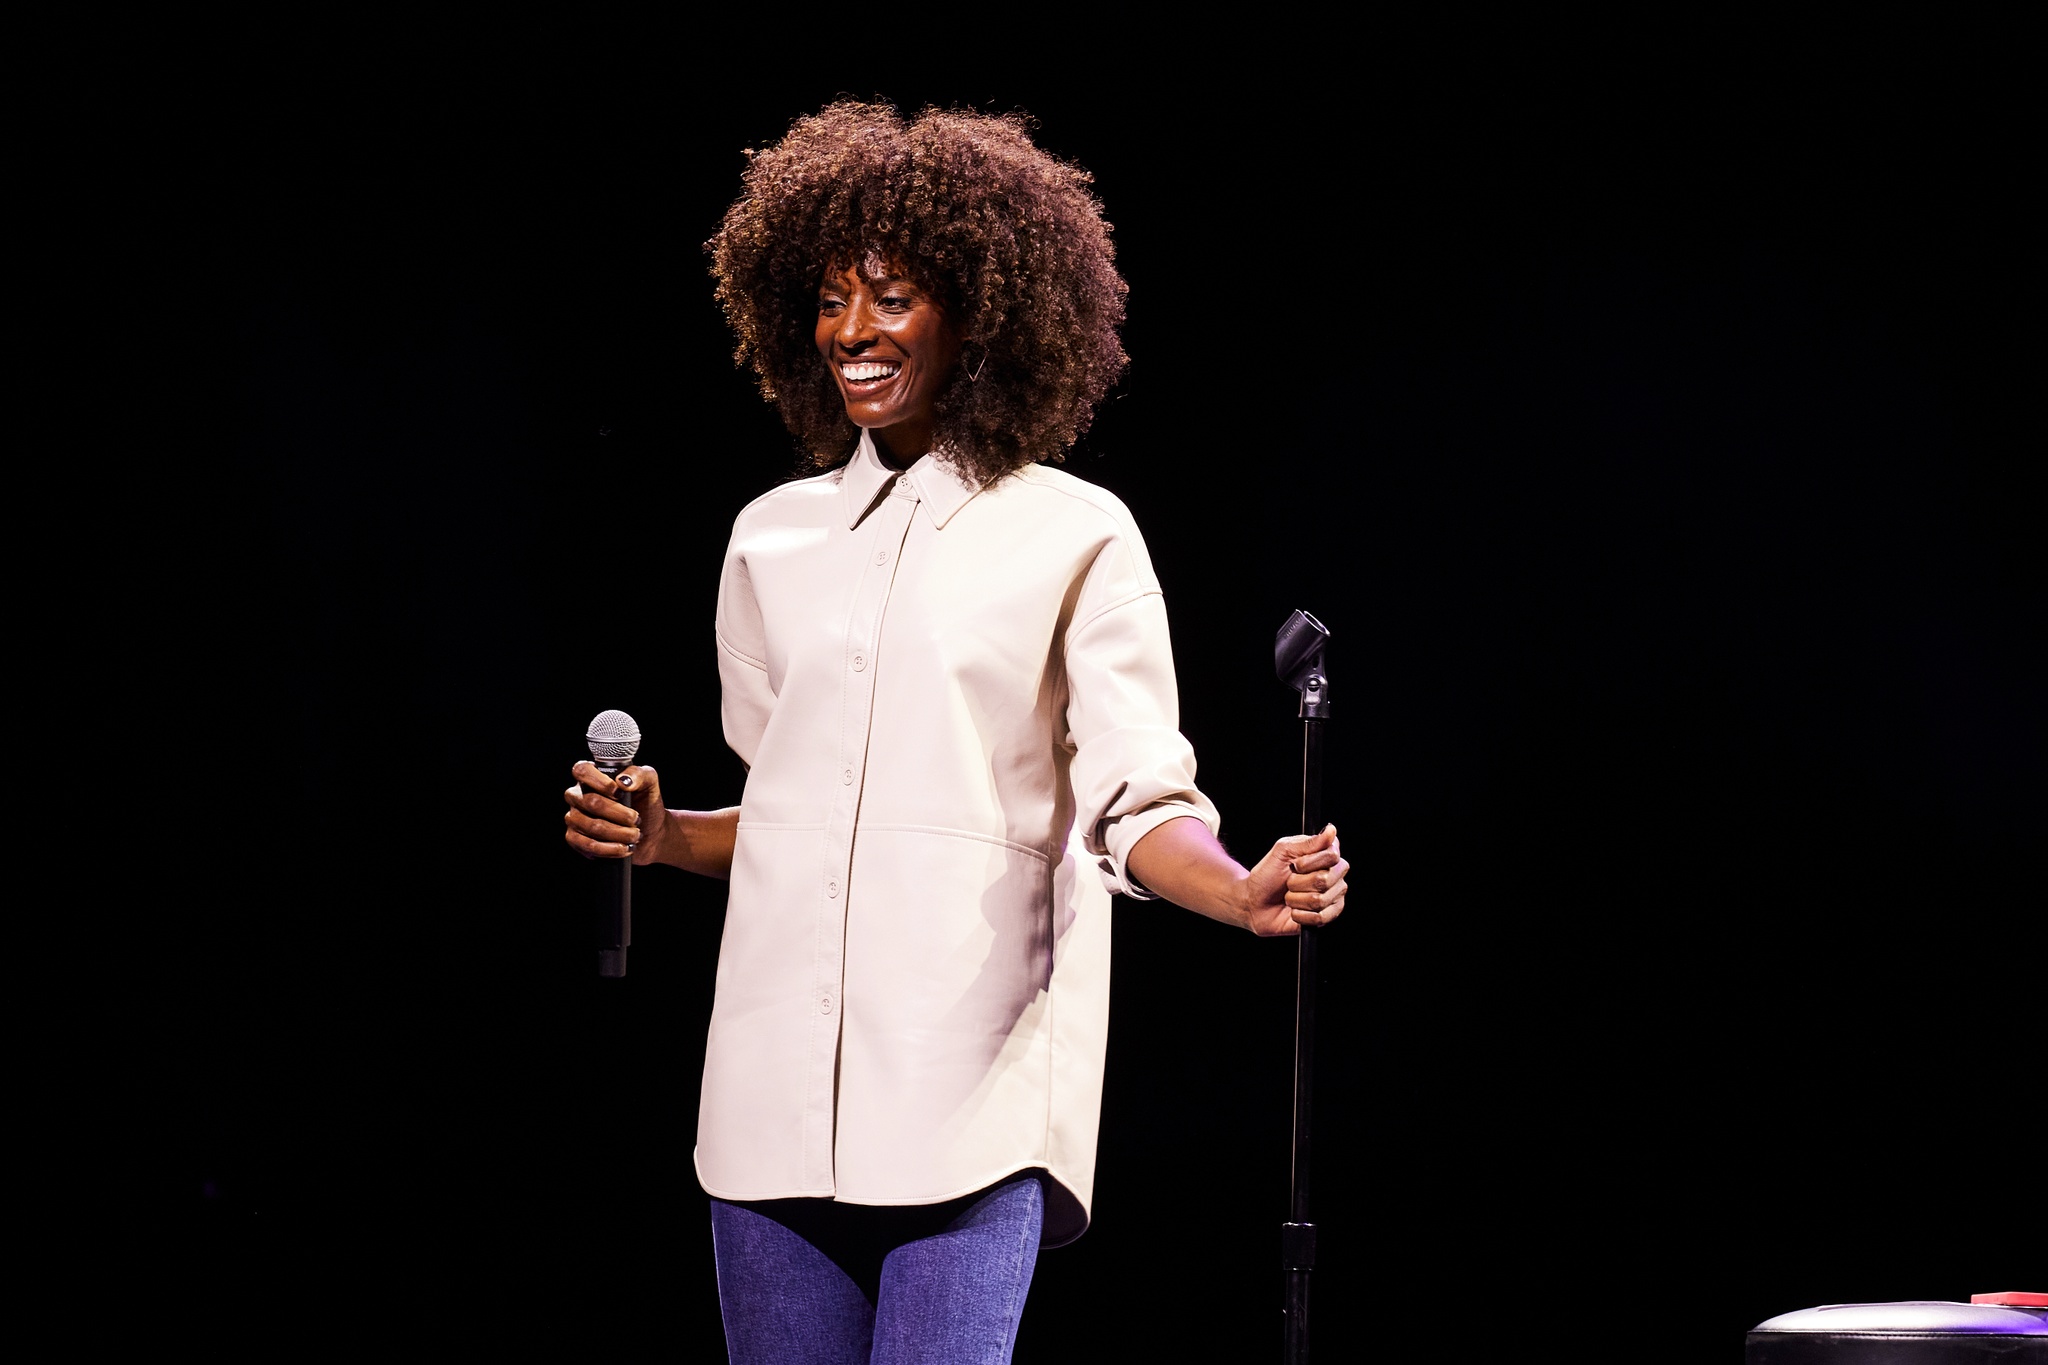 A Black woman on stage holding a microphone in her right hand and grasping the microphone stand with her left. She has curly hair styled in a loose Afro and wears a cream-colored button down shirt untucked. 